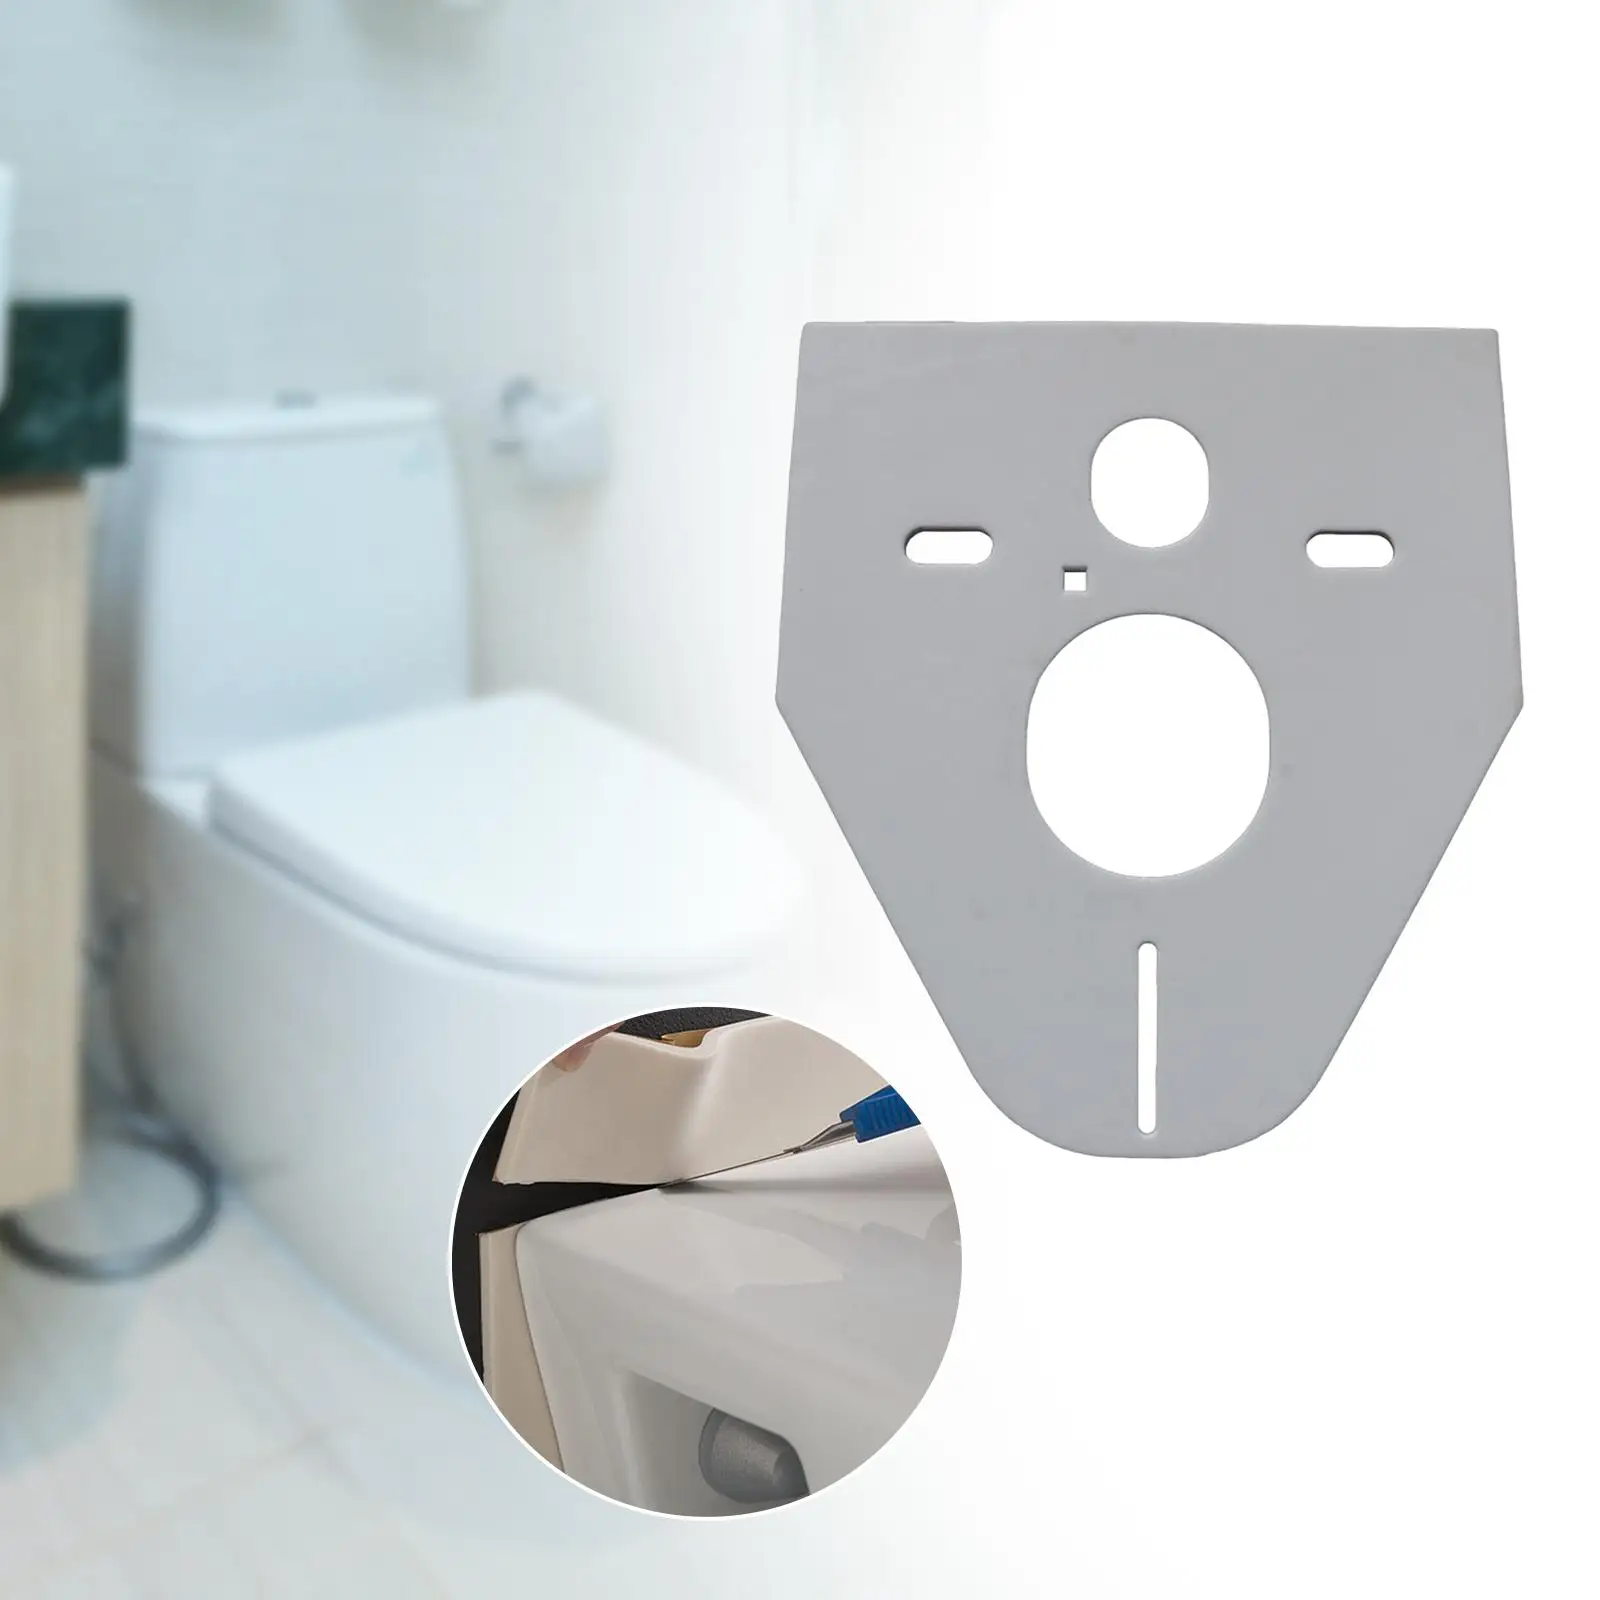 Sound Insulation Mat Accessory for Bathroom Water Tank EVA Pad Hung Toilet Frame Soundproof Anti Crash Mats Self Paste